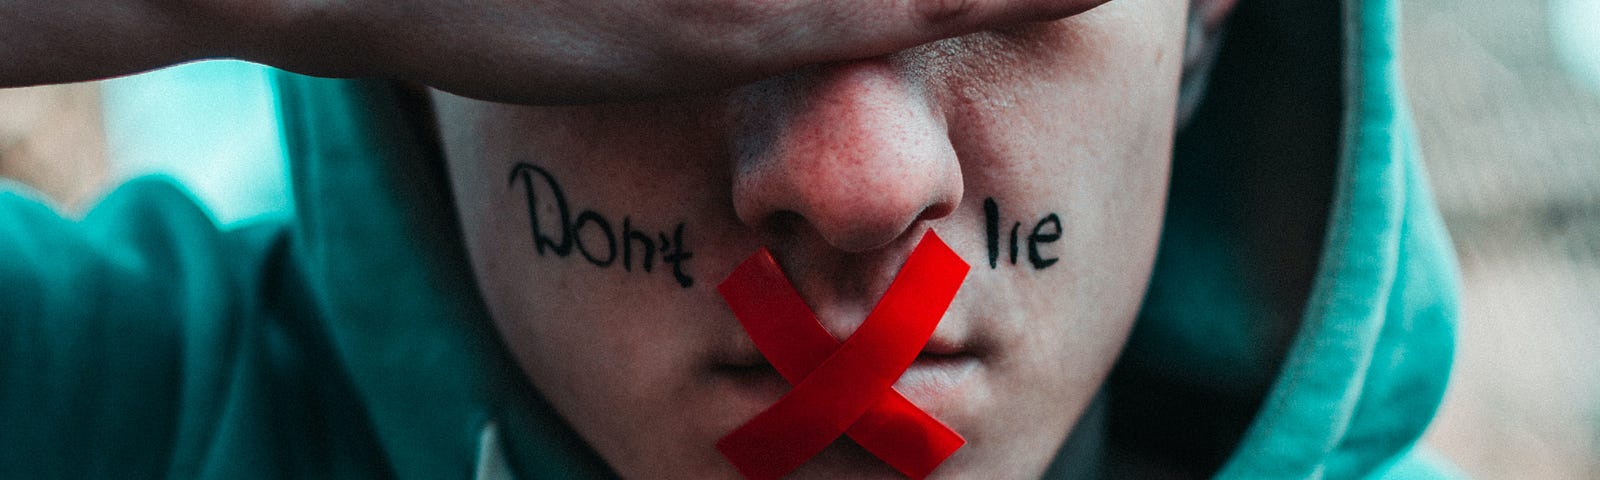 A male in a green hoodie covers his eyes with his hands. His mouth has a red X taped over it and the words “Don’t lie” are written on his face.